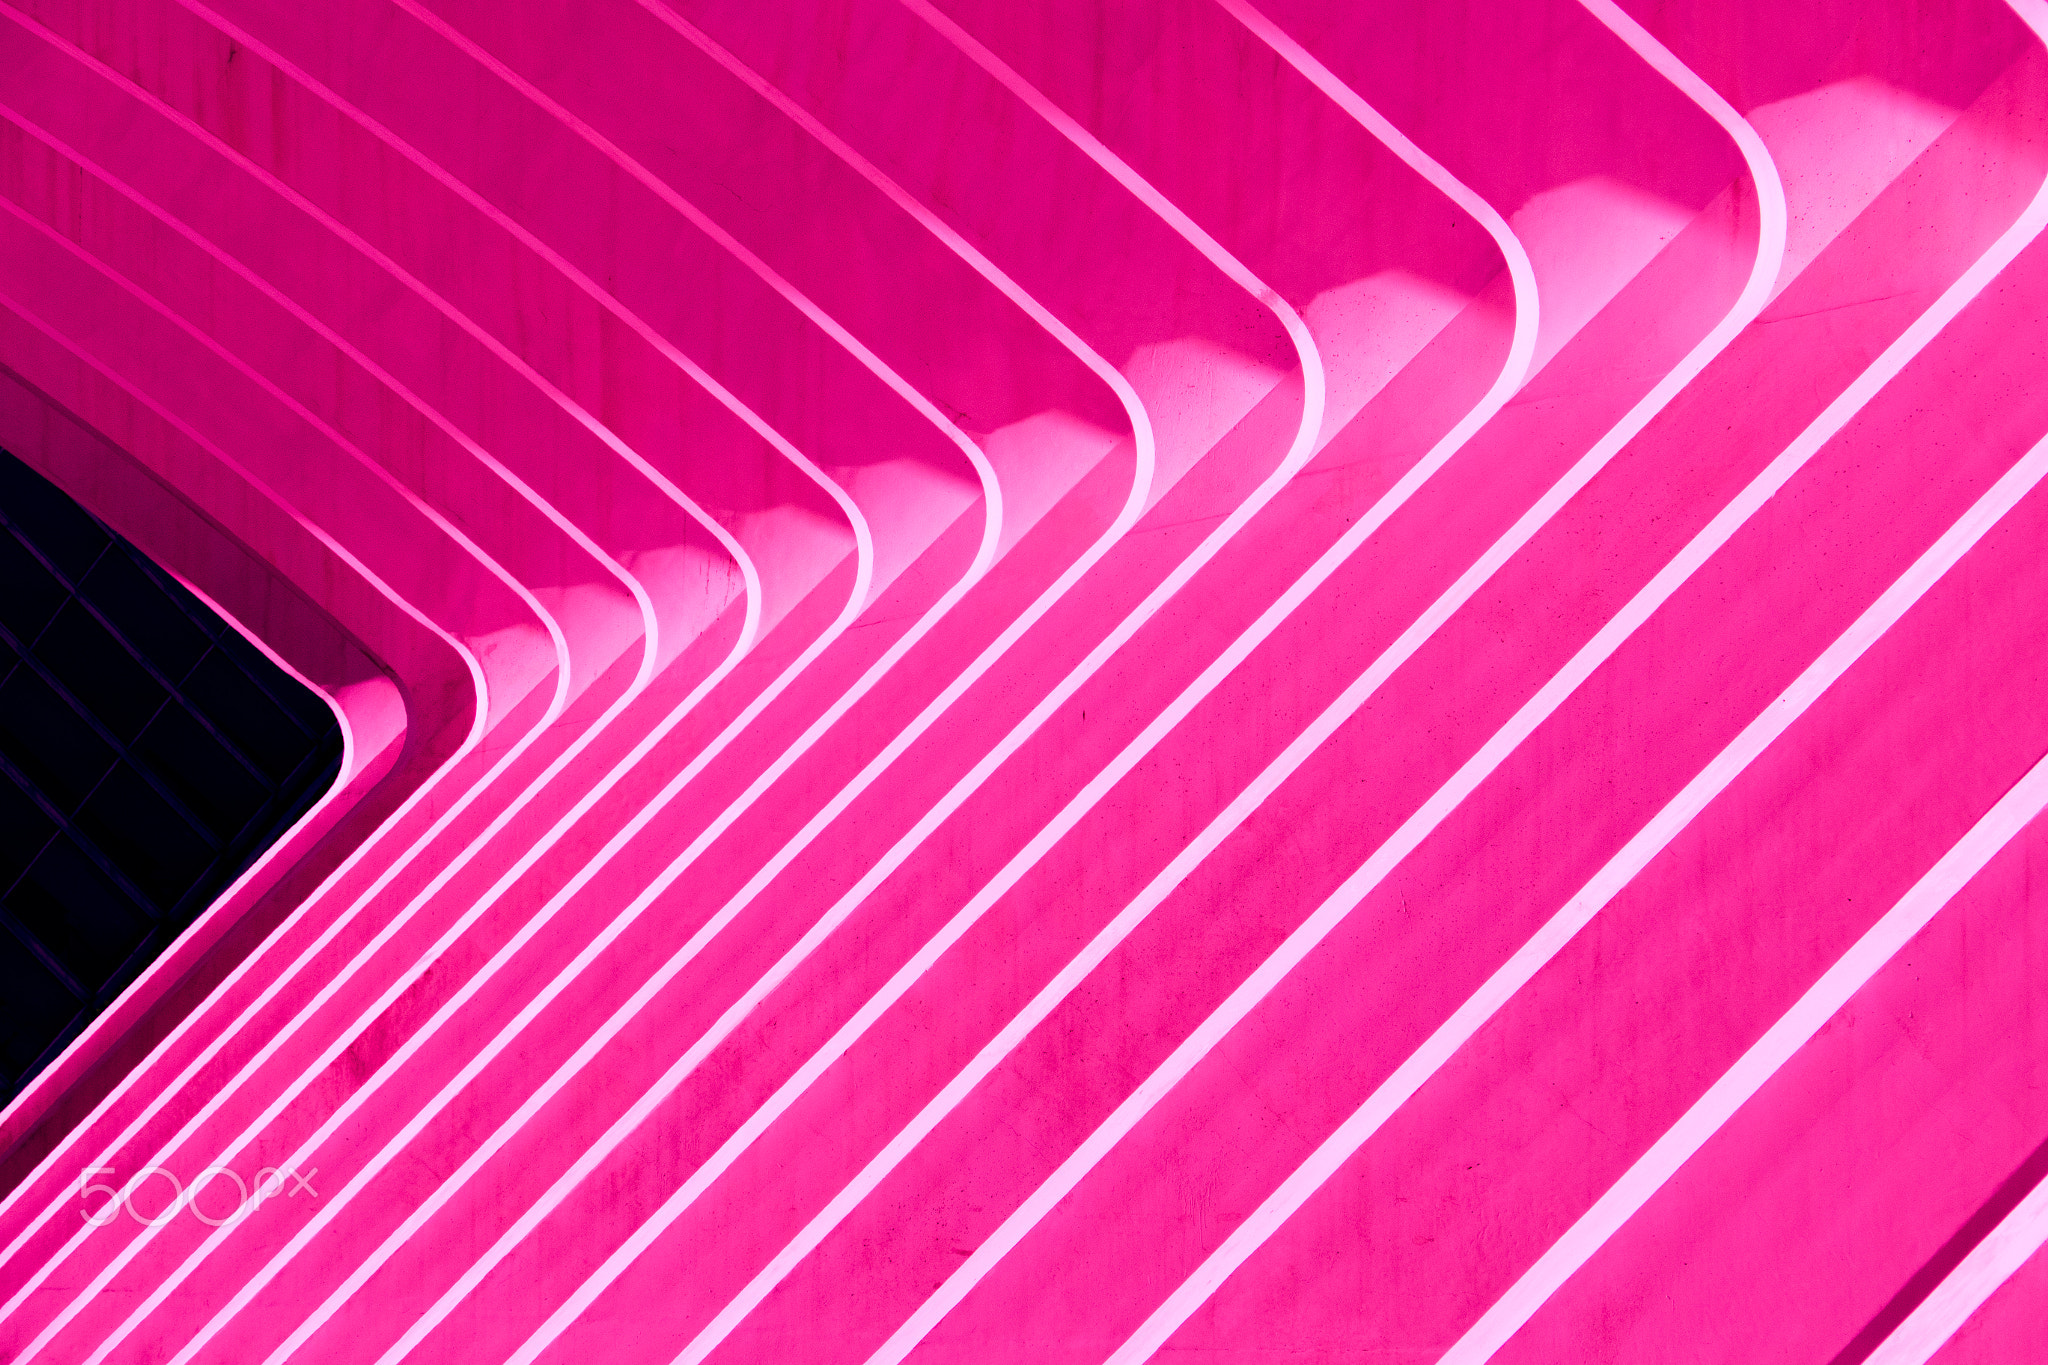 Abstract lines in modern vivid pink